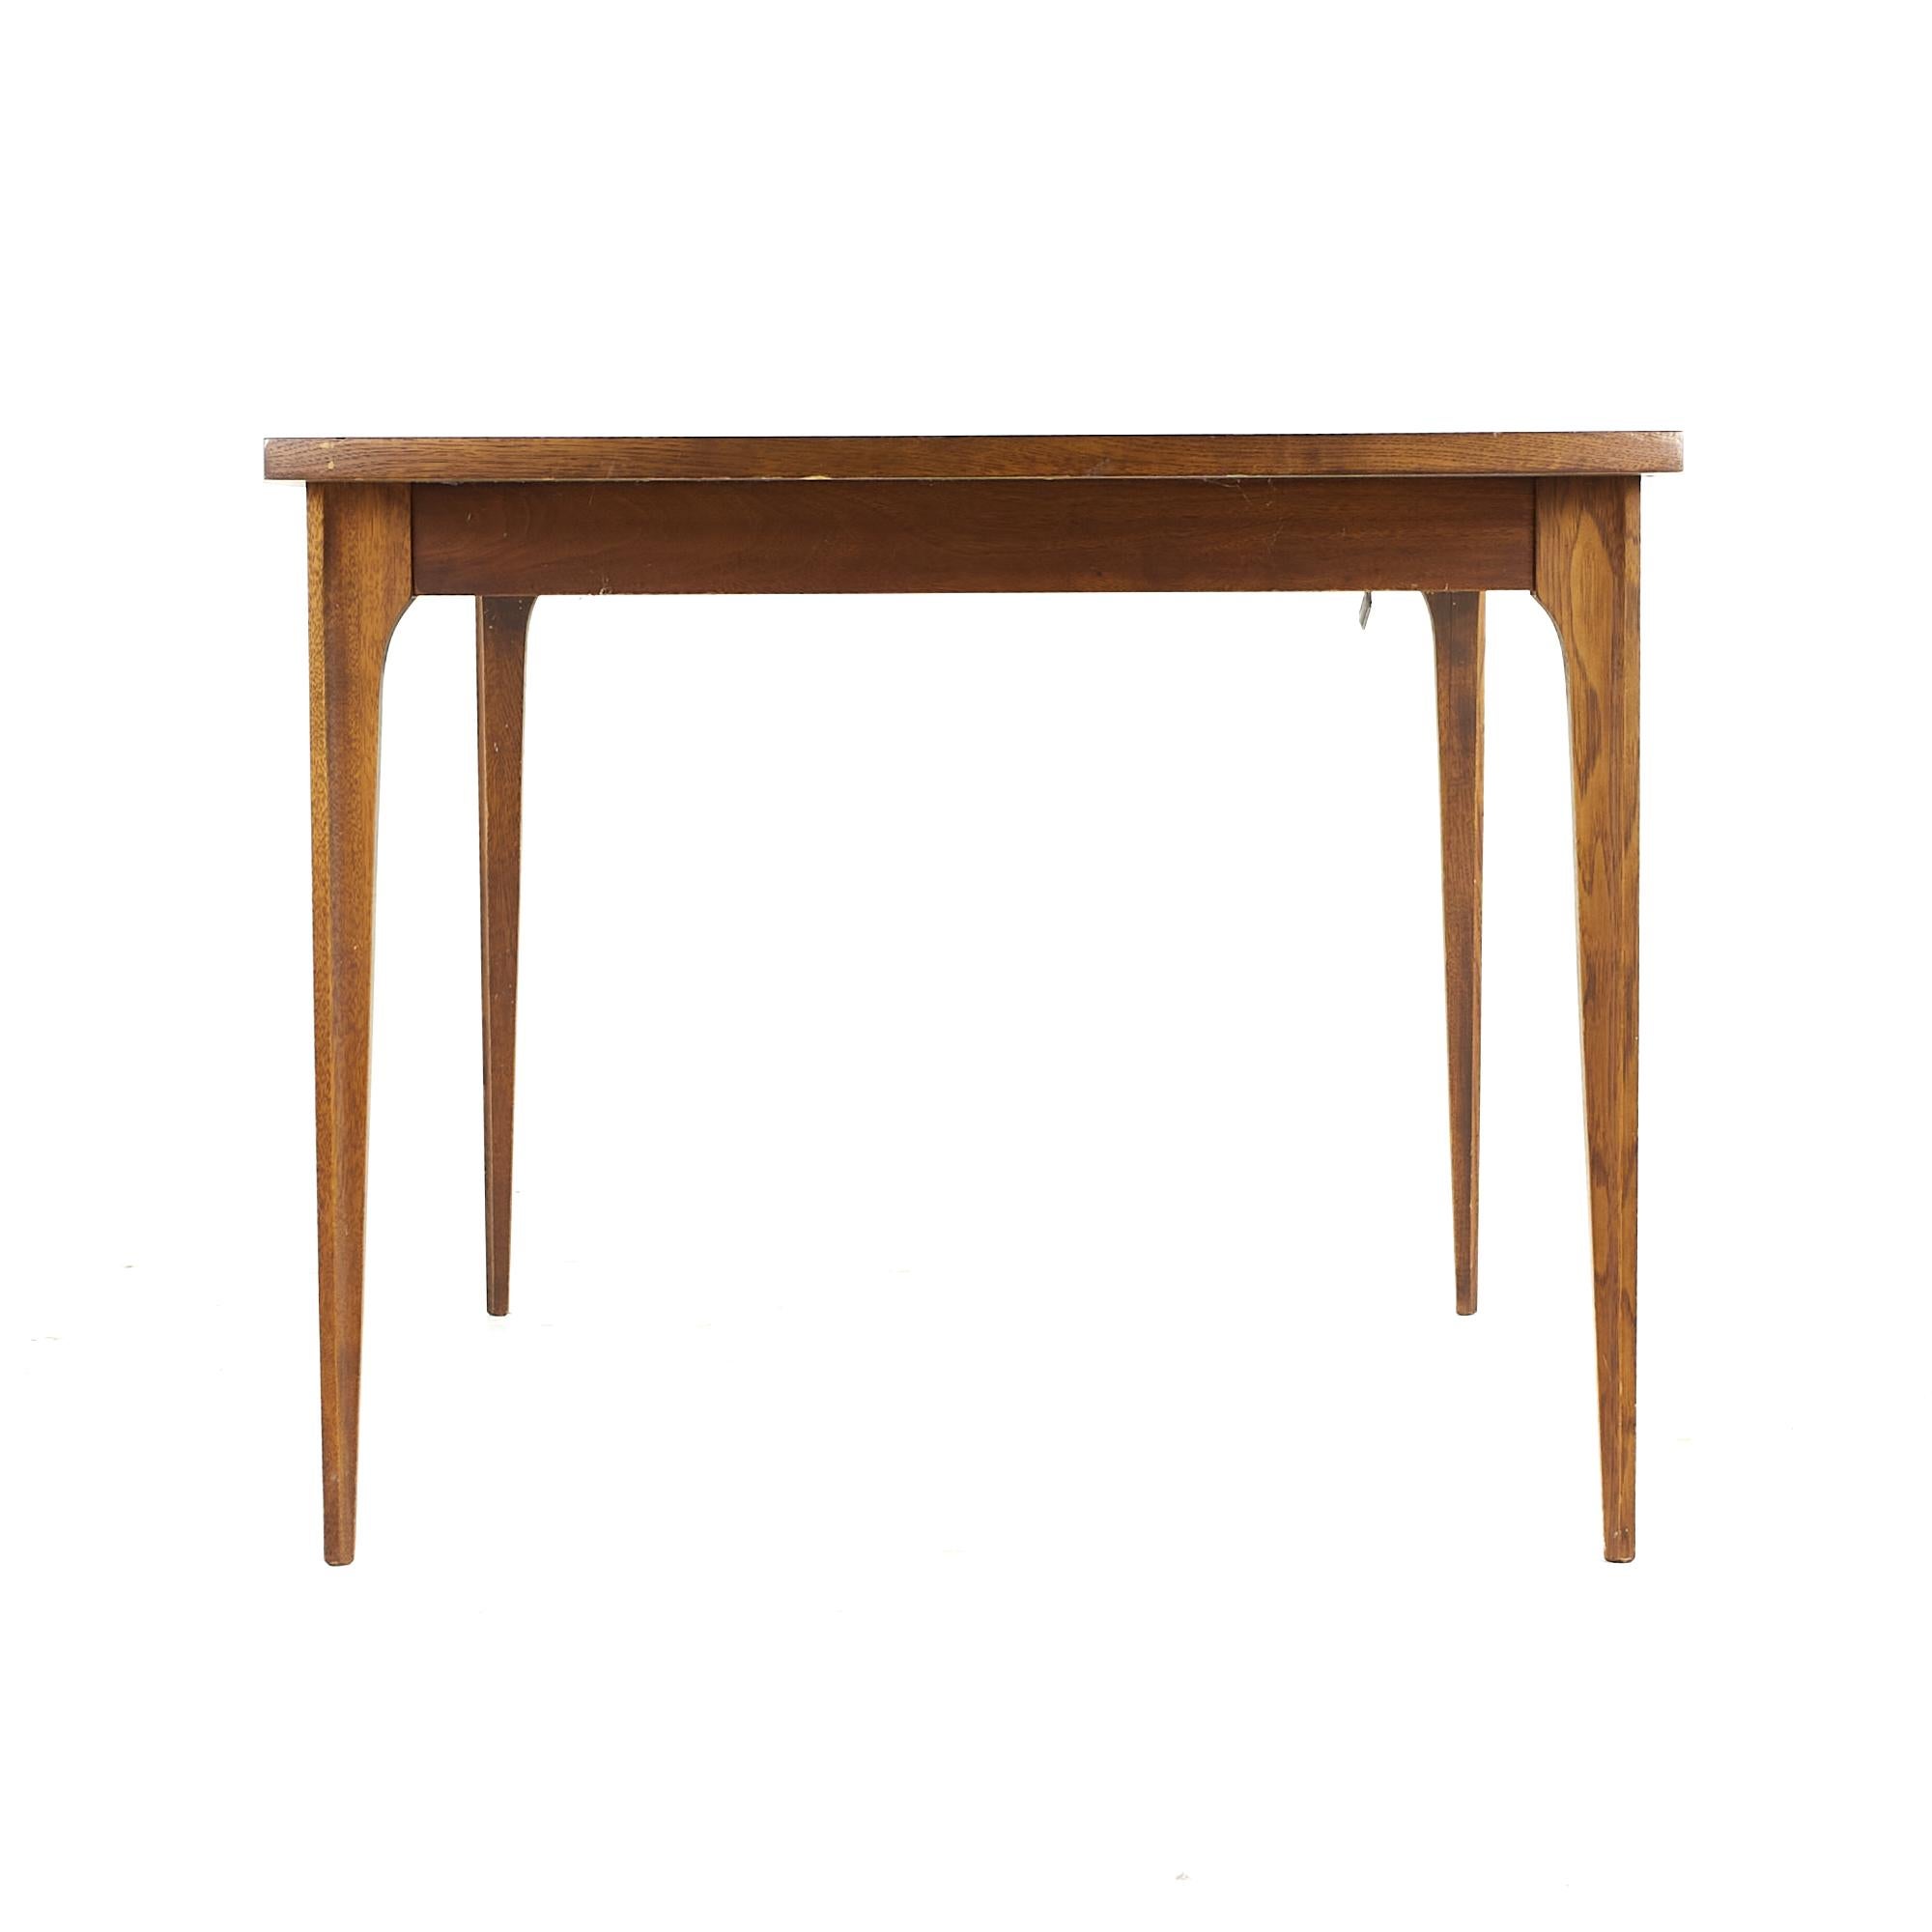 American Broyhill Brasilia Midcentury Walnut Dining Table with 1 Leaf For Sale